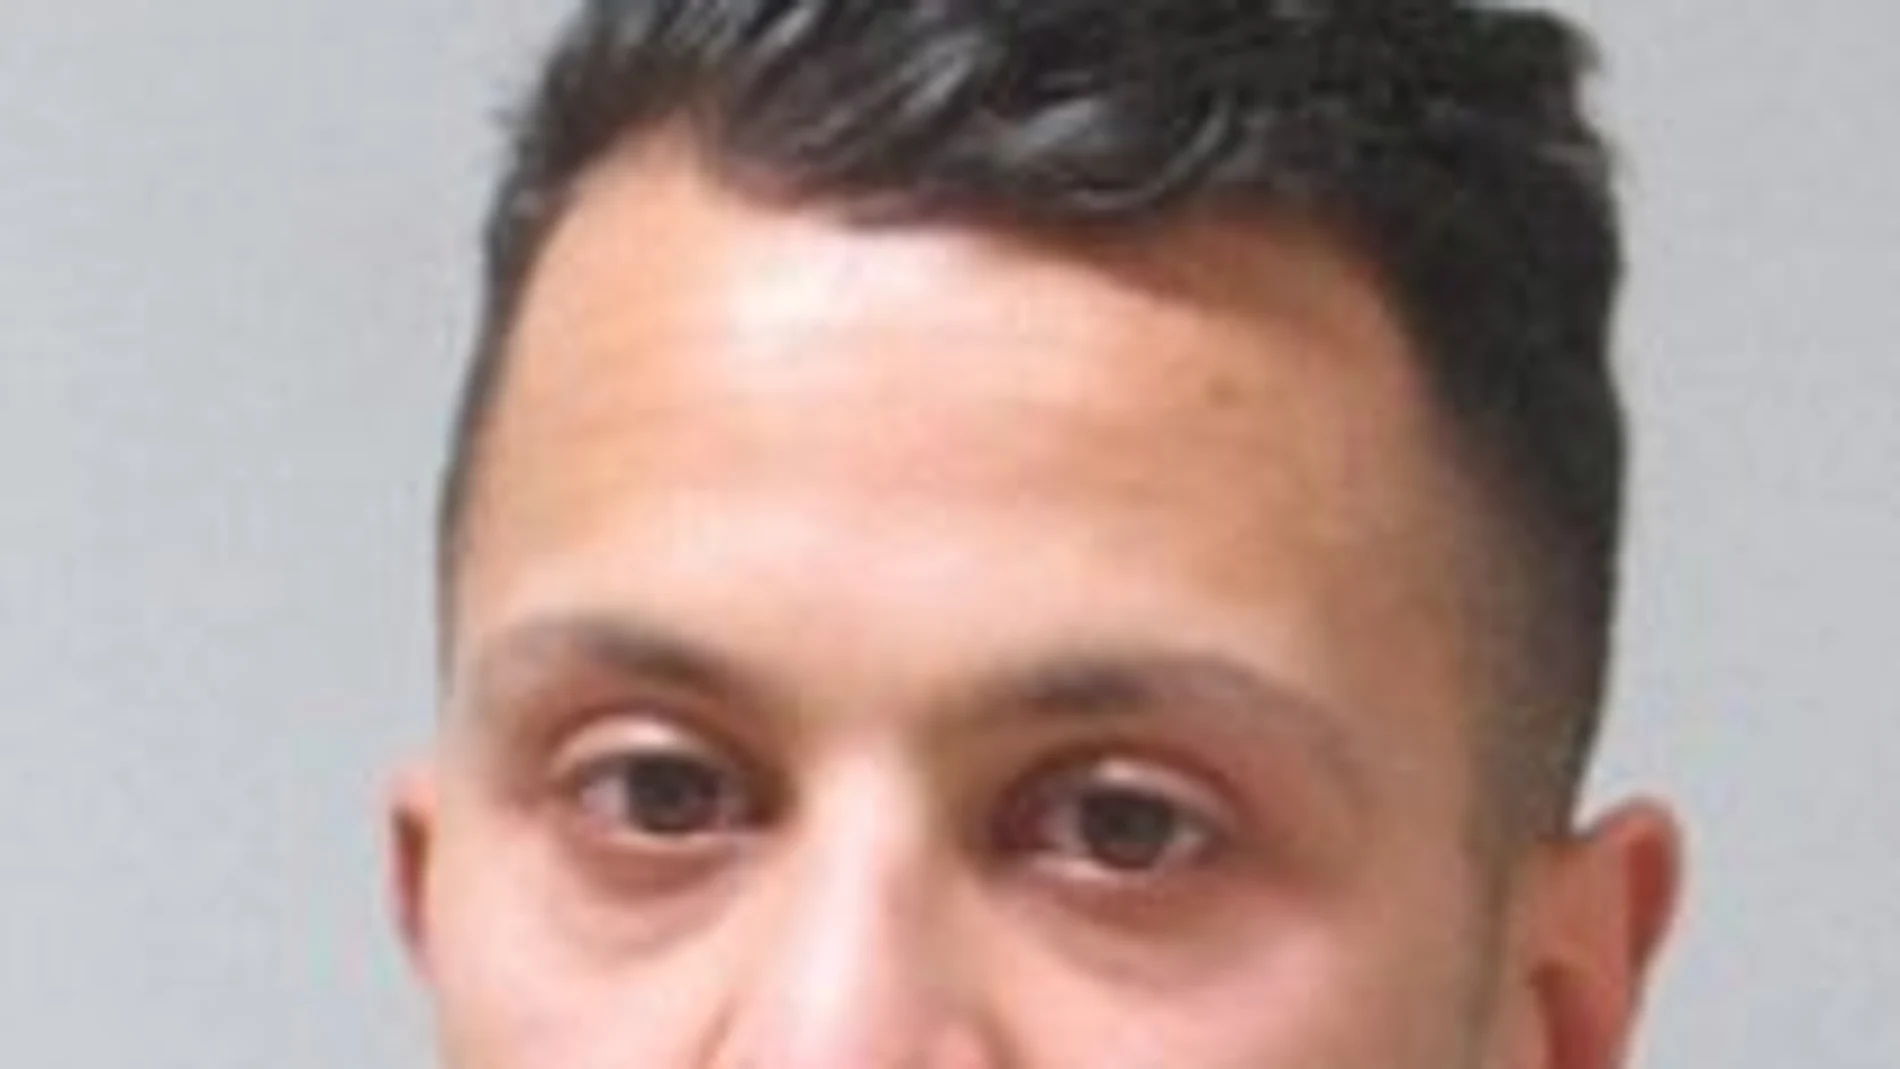 FILE - This is a an undated handout image made available by Belgium Federal Police of Salah Abdeslam who was wanted in connection to the attacks in Paris on Nov. 13, 2015. France is putting on trial 20 men accused in the Nov. 13, 2015, Islamic State terror attacks on Paris that left 130 people dead and hundreds injured . Twenty men are charged, but only 14 will be on trial. Chief among them is Salah Abdeslam, who ditched his car and a malfunctioning suicide vest and ultimately fled to a hideout in his hometown of Brussels. (Belgium Federal Police via AP, File)